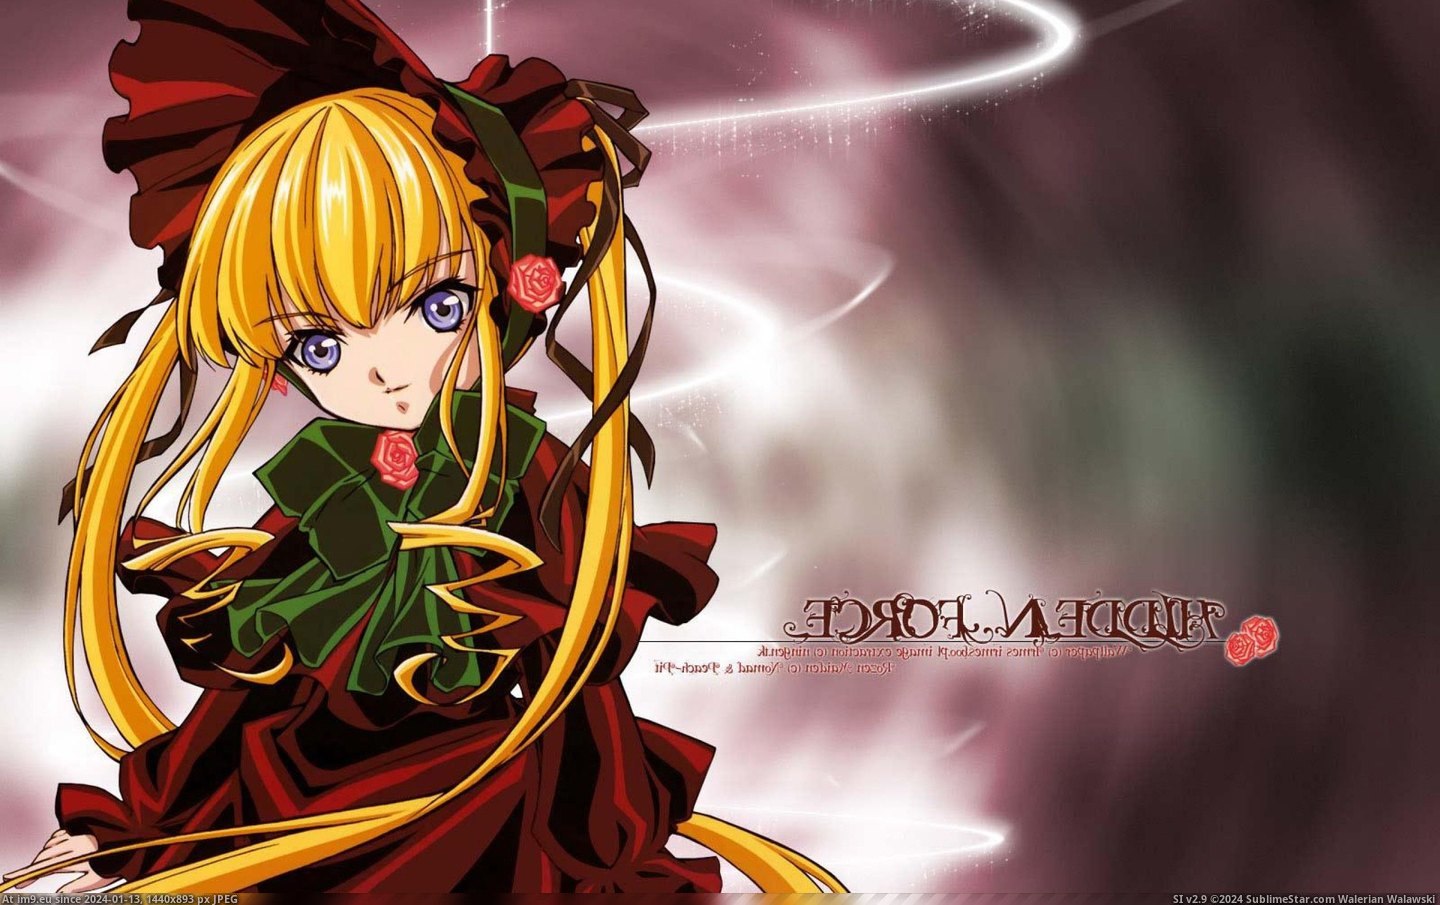 #Wallpaper #Rozen #Maiden Rozen Maiden Hd Wallpaper 22(25) (HD) Pic. (Image of album HD Wallpapers - anime, games and abstract art/3D backgrounds))